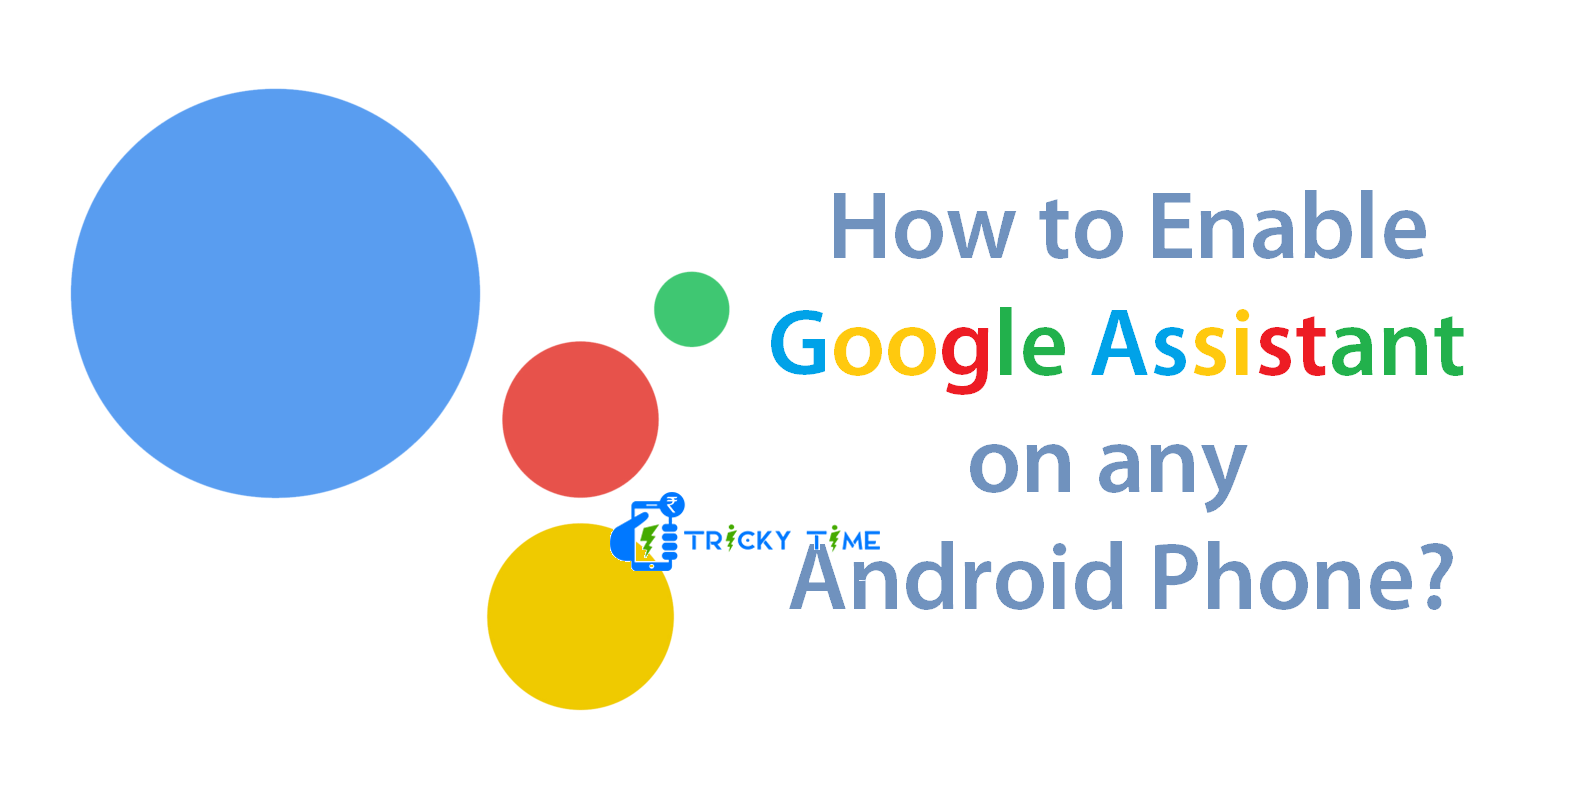 How to Enable Google Assistant in any Android Phone [Trick]